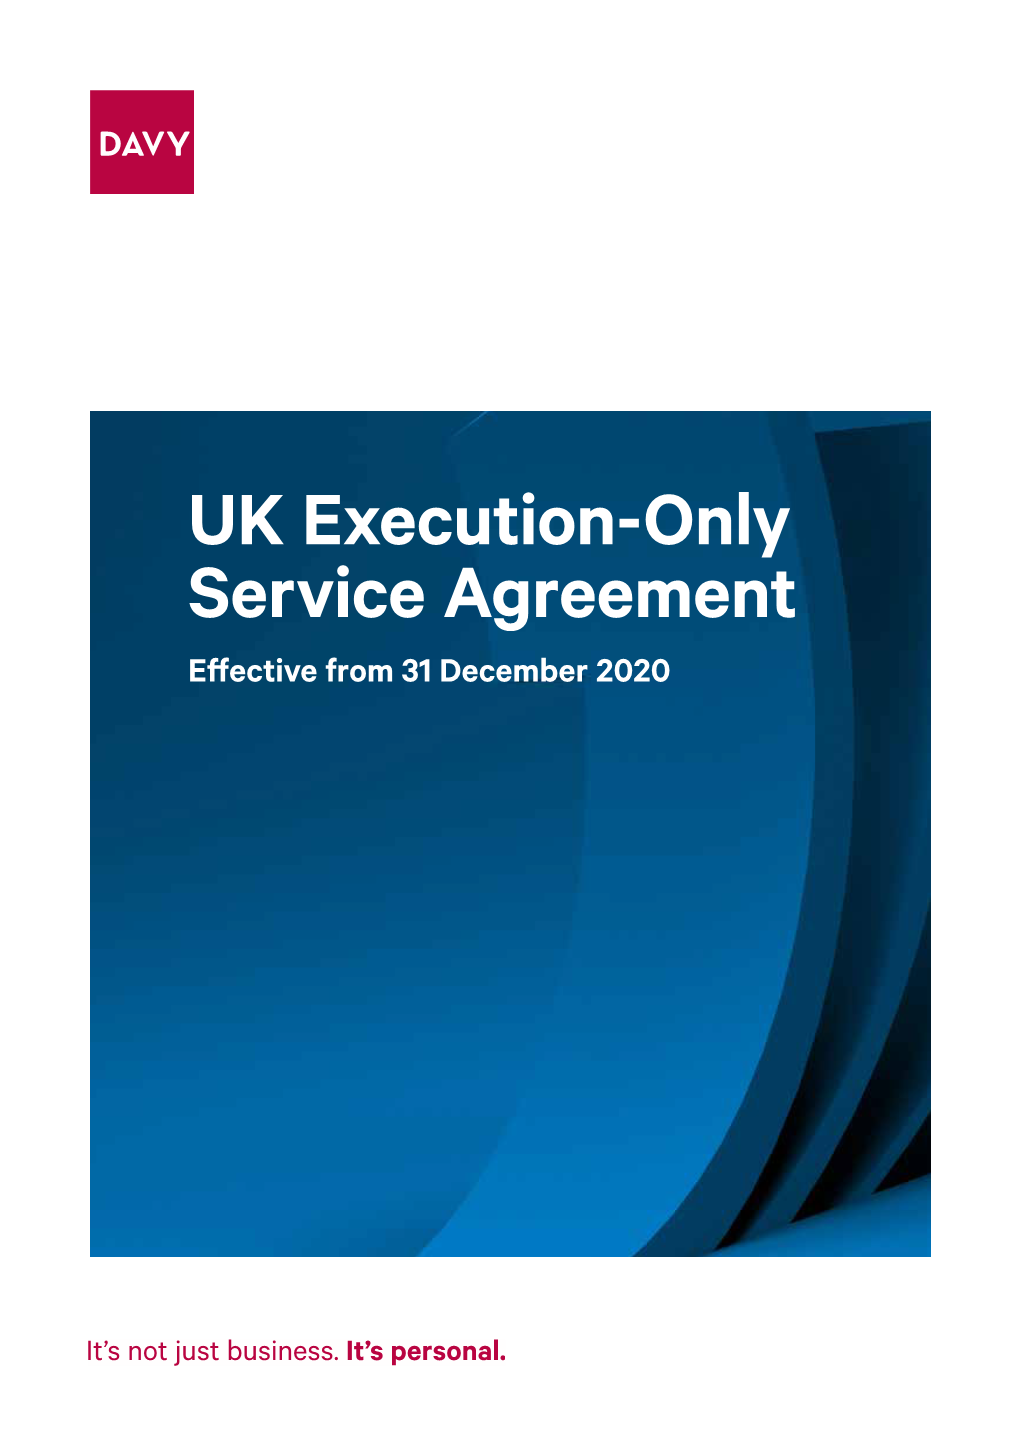 UK Execution-Only Service Agreement Effective from 31 December 2020 Welcome to Davy UK Thank You for Choosing Davy UK